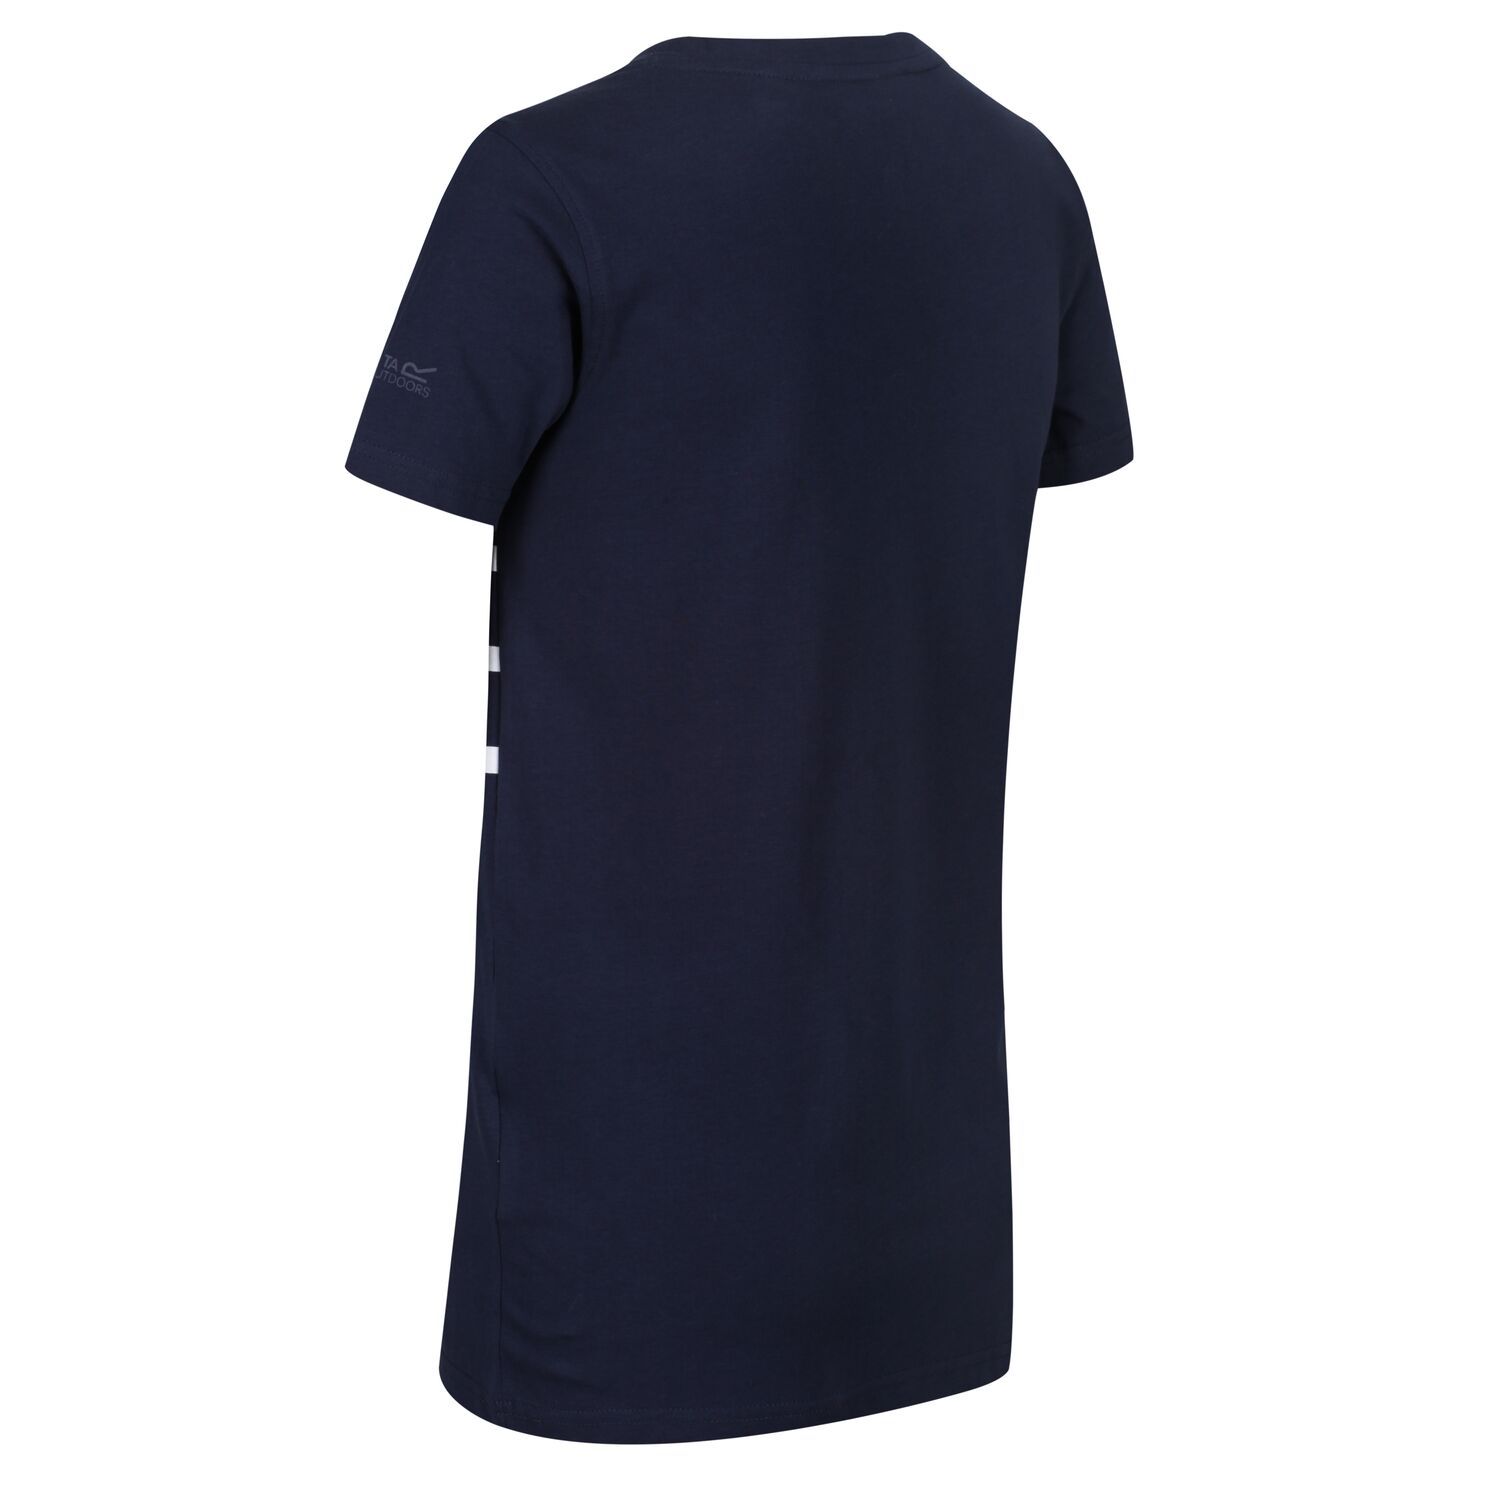 Material: 100% Cotton. Sustainably sourced, casual crew neck t-shirt made from 160gsm Coolweave 100% Organic Cotton jersey fabric. Features an in-house print inspired by all things outdoors. Garment washed for a softer, broken-in feel.